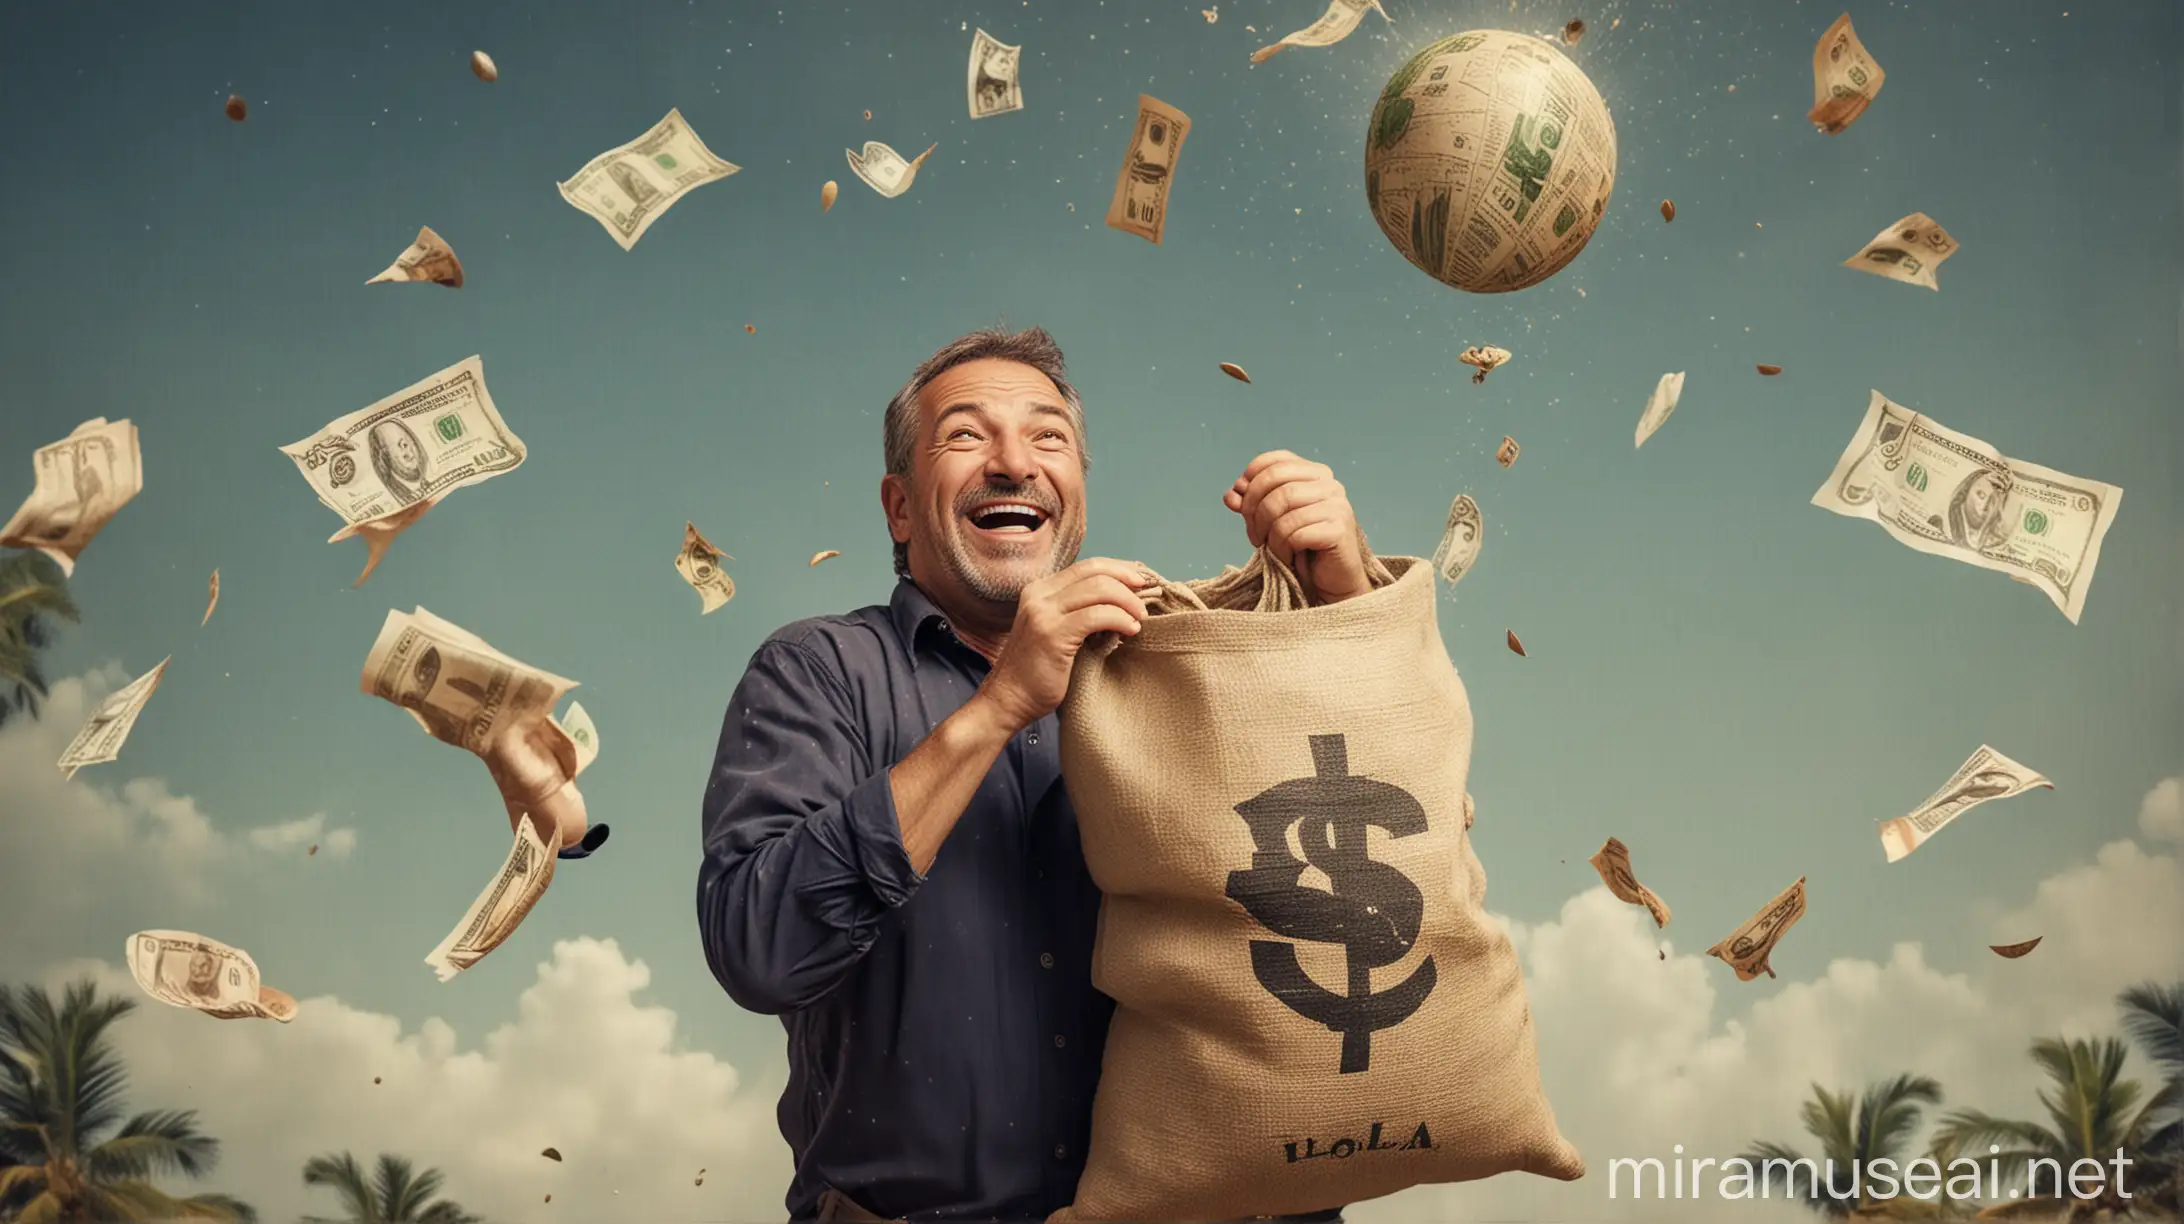 A middle-aged man with a happy expression is holding a burlap sack with a dollar sign on it. Banknotes are raining down from the sky, falling into the sack. At the top, where the money is coming from, there is a large flag with a stylized globe, symbolizing the entire world.
The flag with the globe represents the idea that various countries around the world offer financial incentives.insert a background with tropical landscapes and mediterranean places.Realistic
